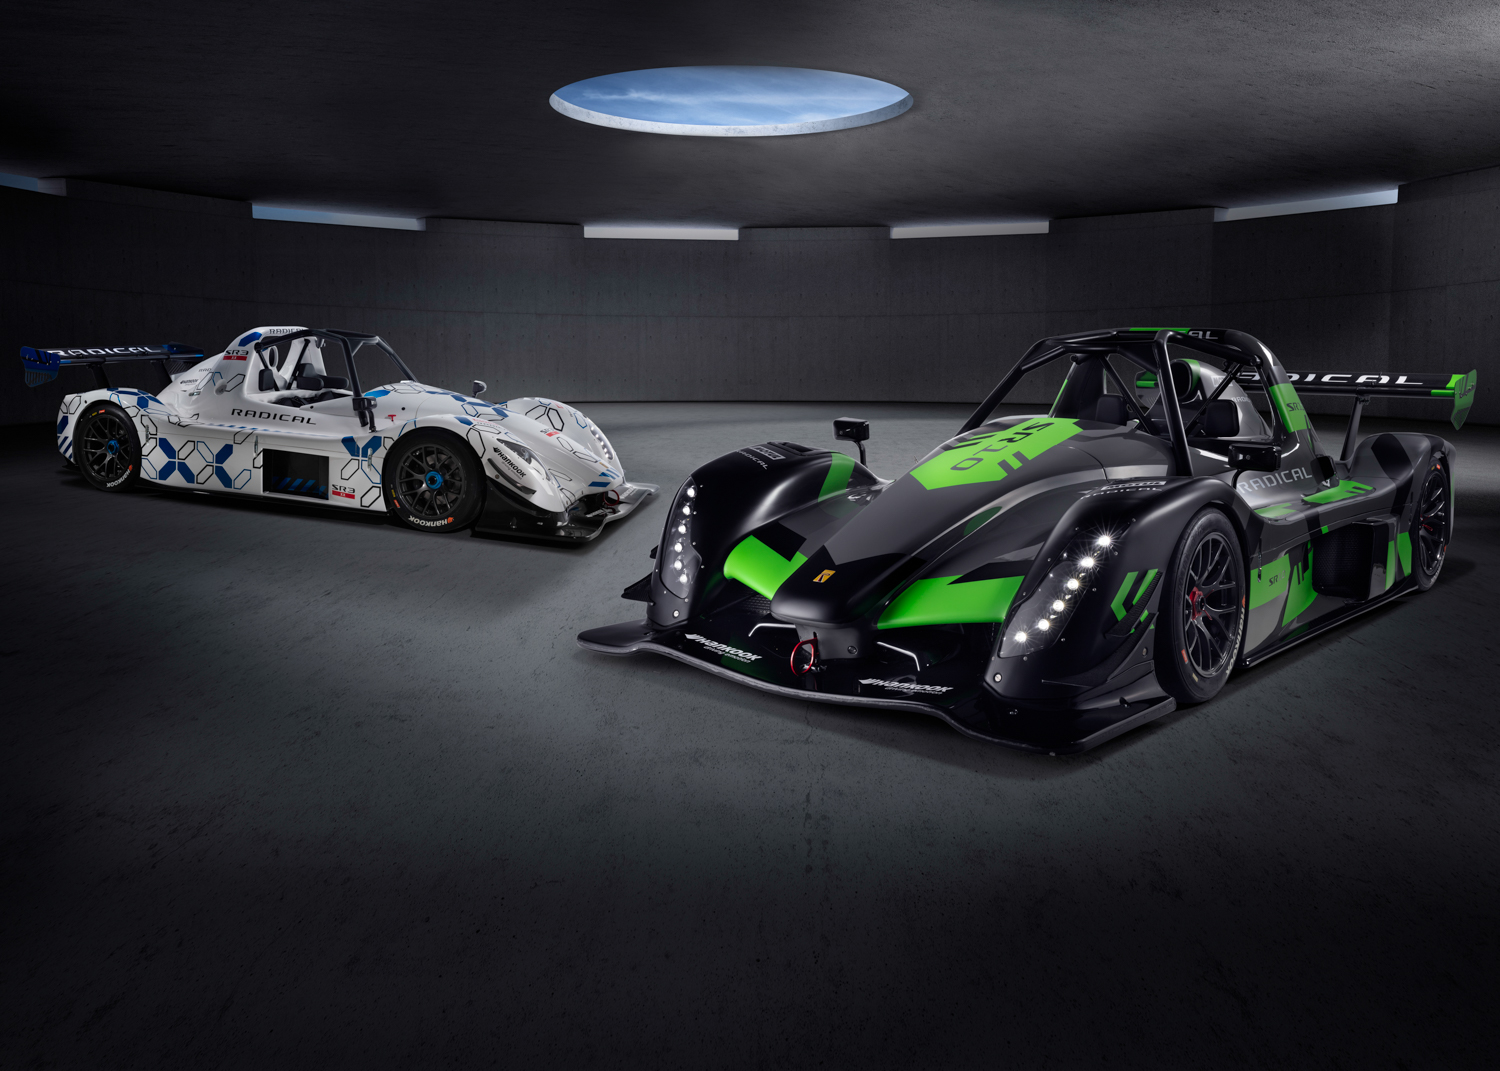 Upgrades for Radical’s critically acclaimed SR3 XX and SR10 for 2022 model year